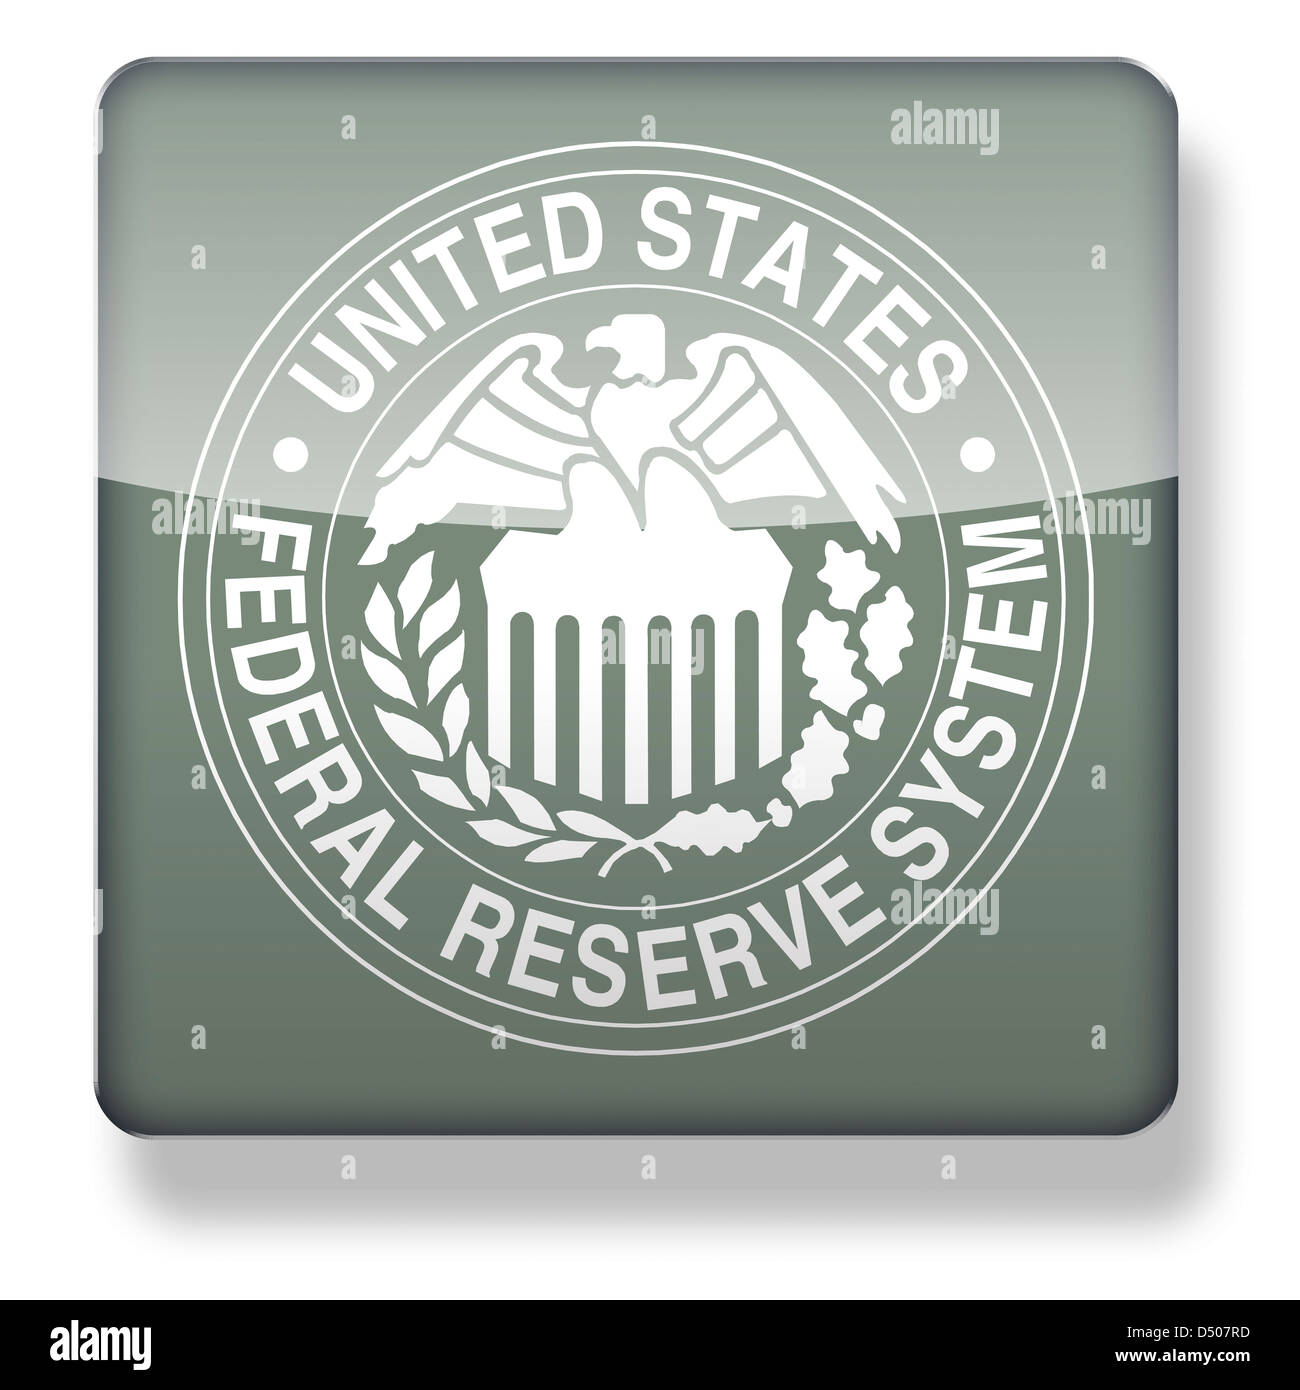 US Federal Reserve System seal as an app icon. Clipping path included. Stock Photo